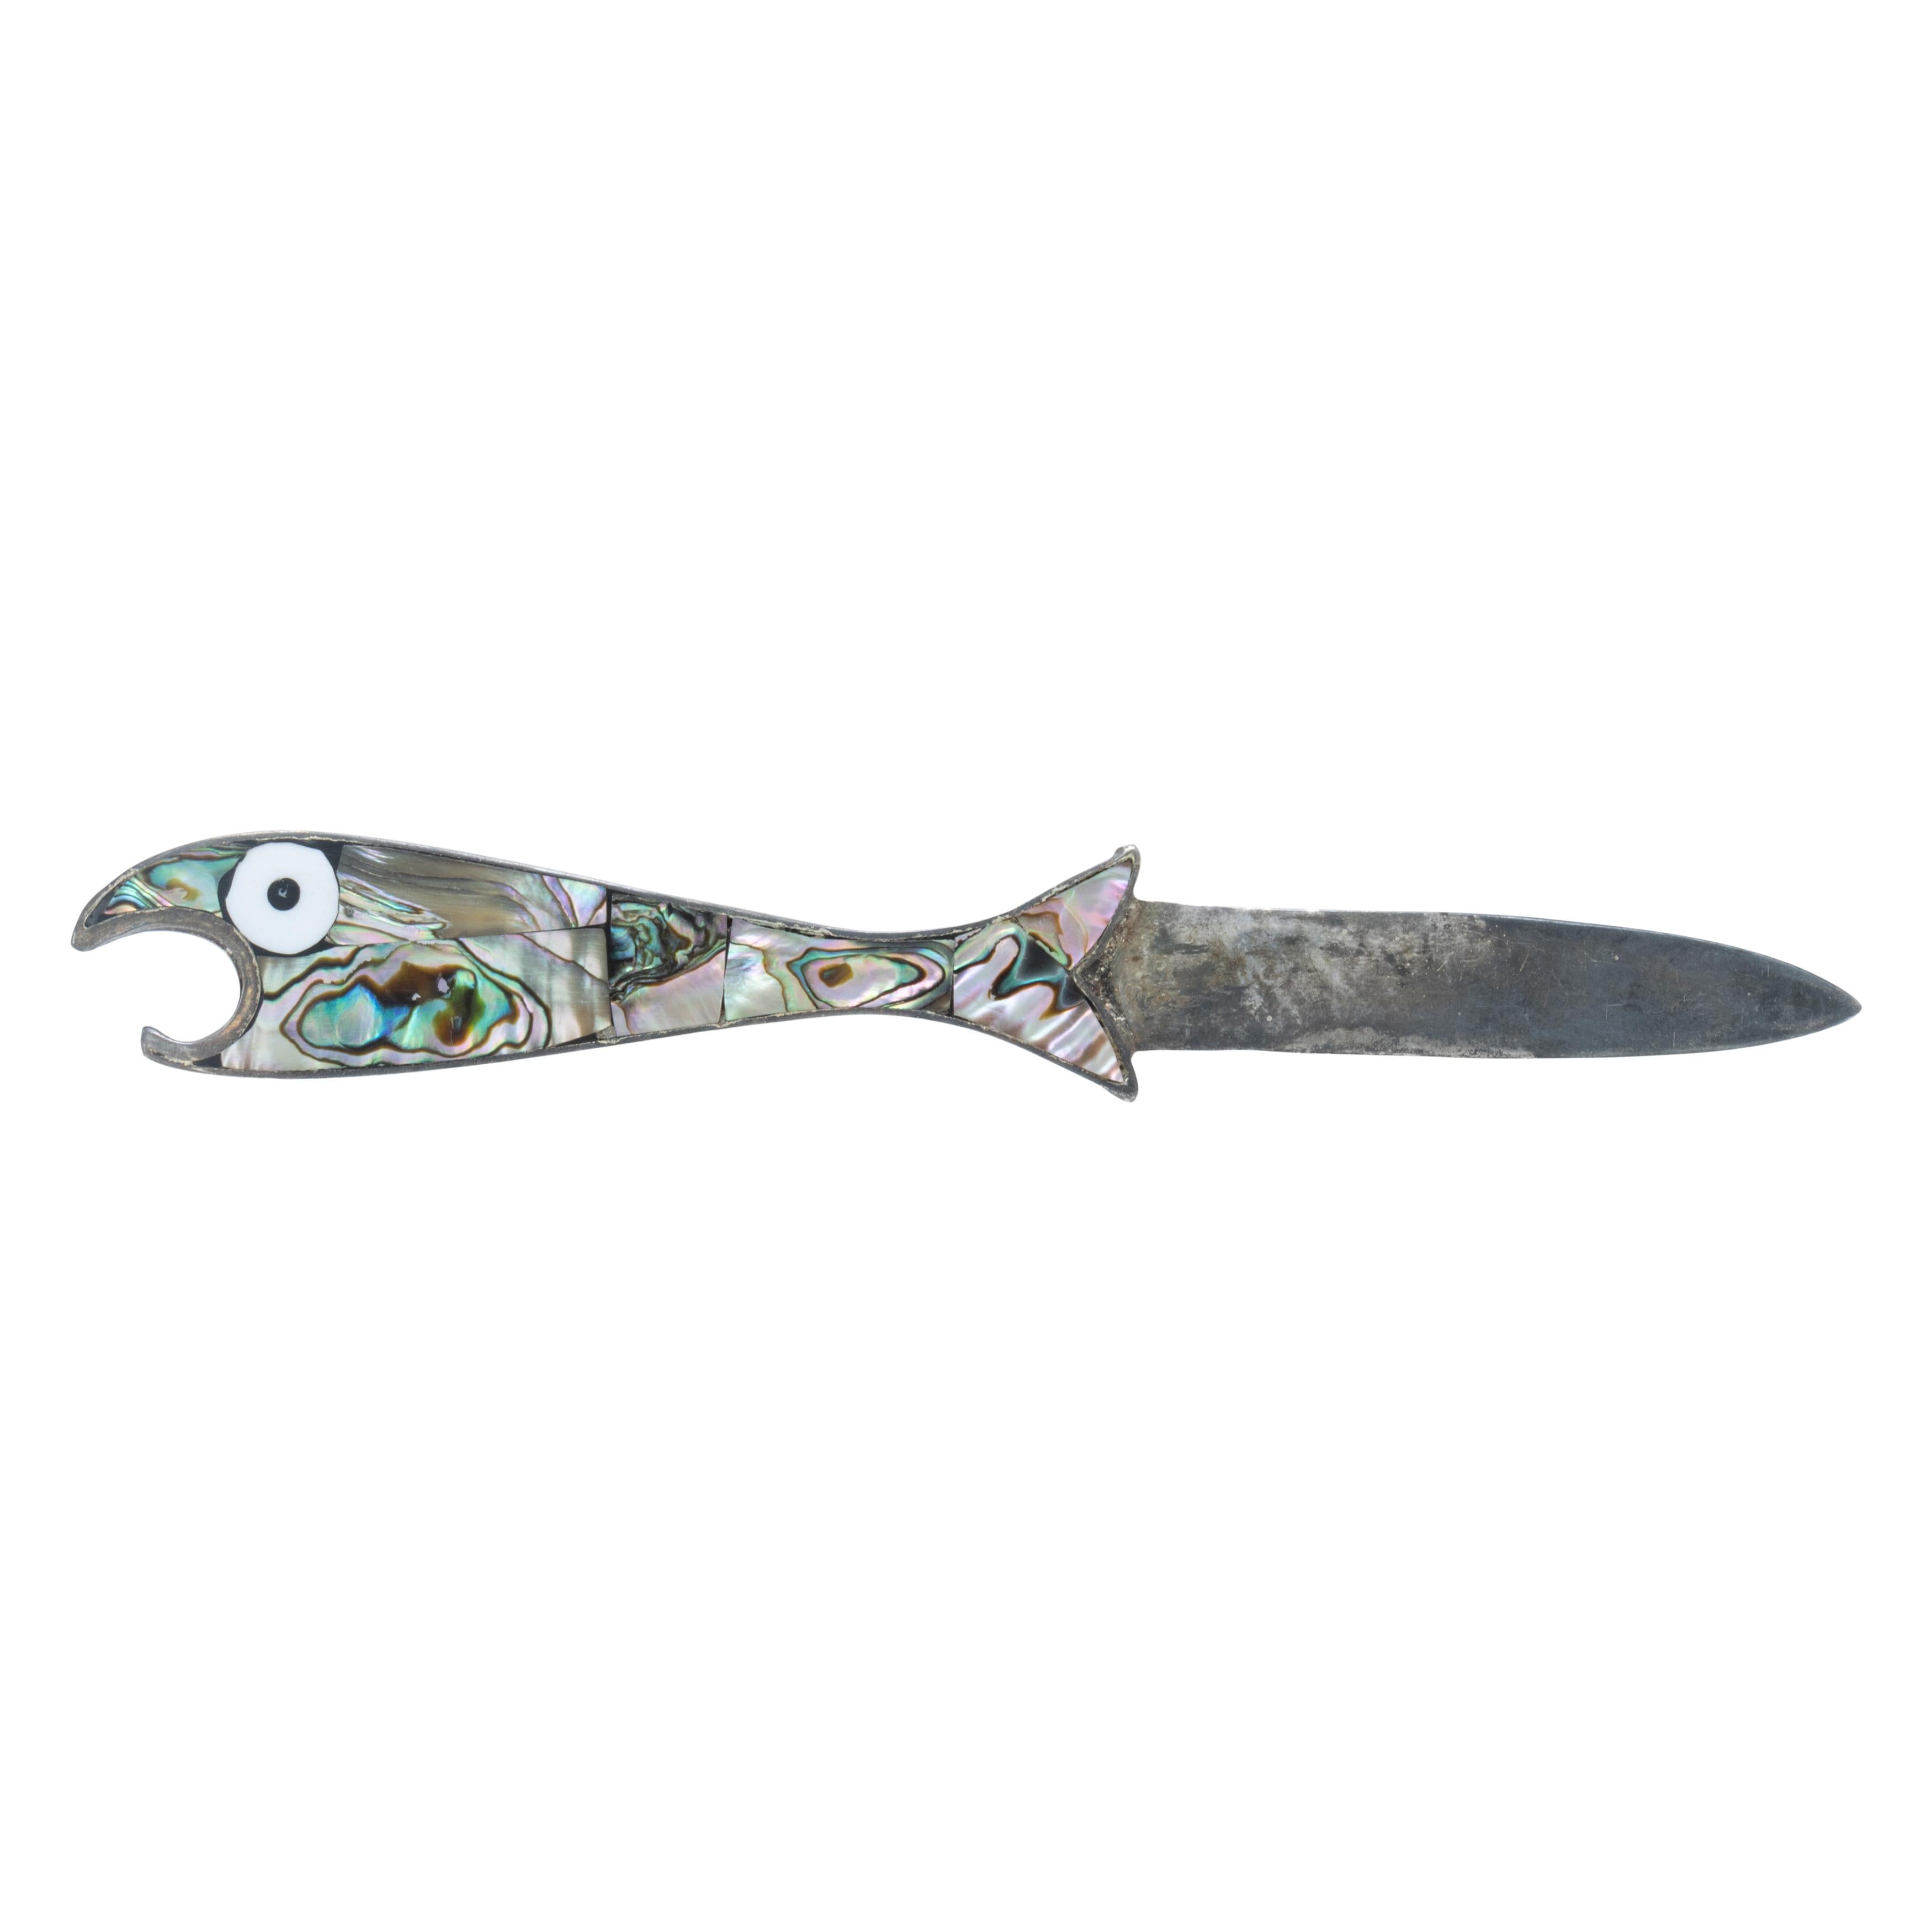 Set of three matching abalone fish botte openers with knives. Bodies are completely overlaid with abalone shell in lovely swirling colors of silver, purple, blue, green, and black. Fish are stylized with comically large white and black eyes and thin